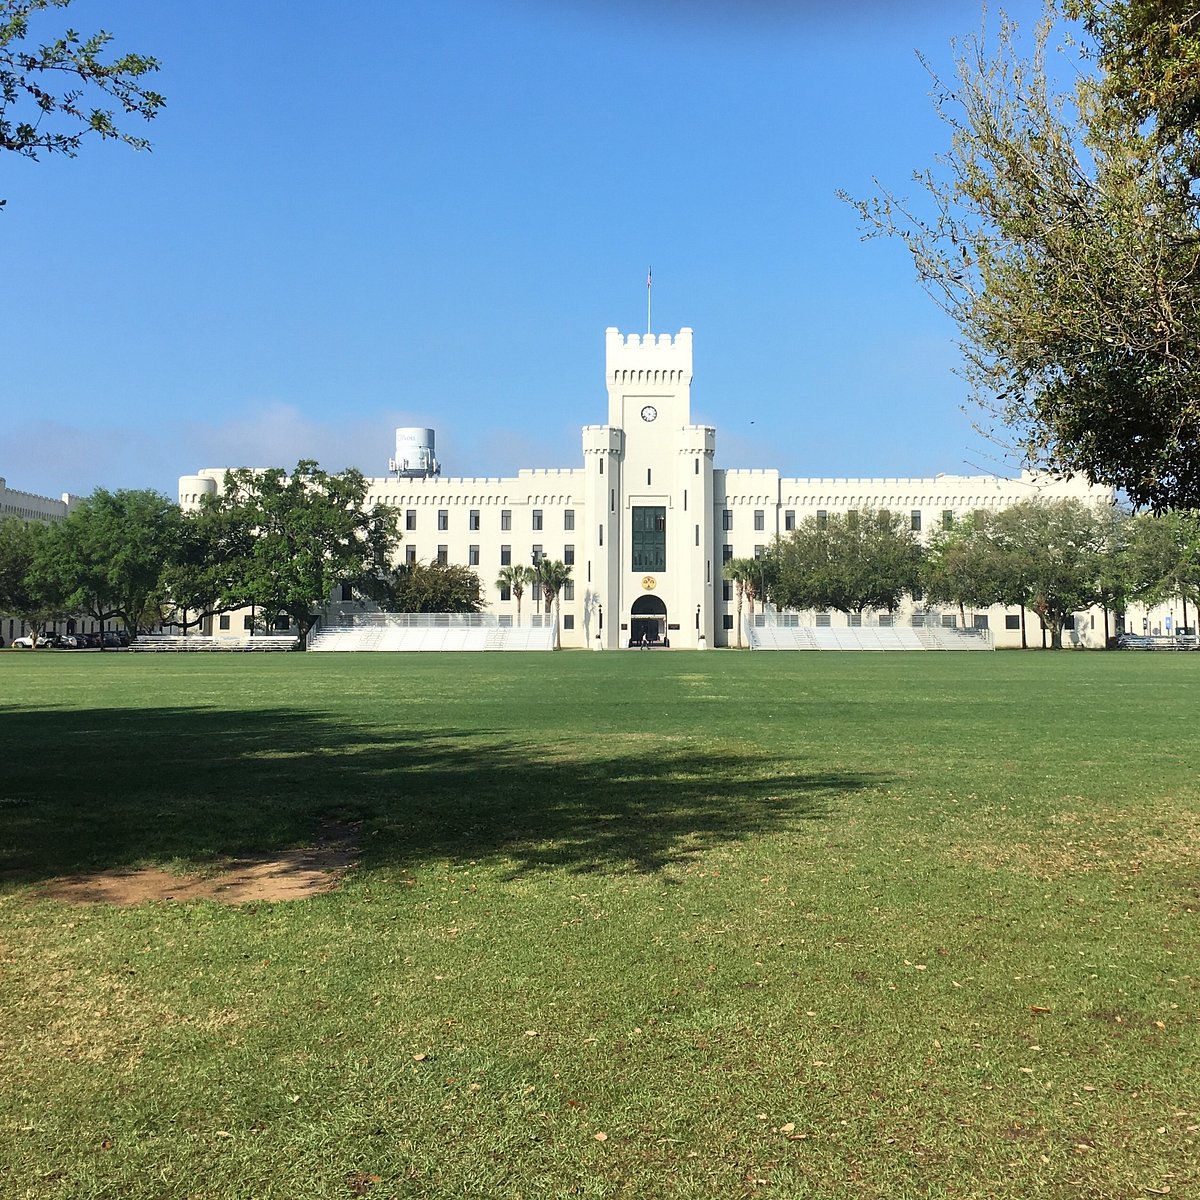 Apply to The Citadel, The Military College of South Carolina